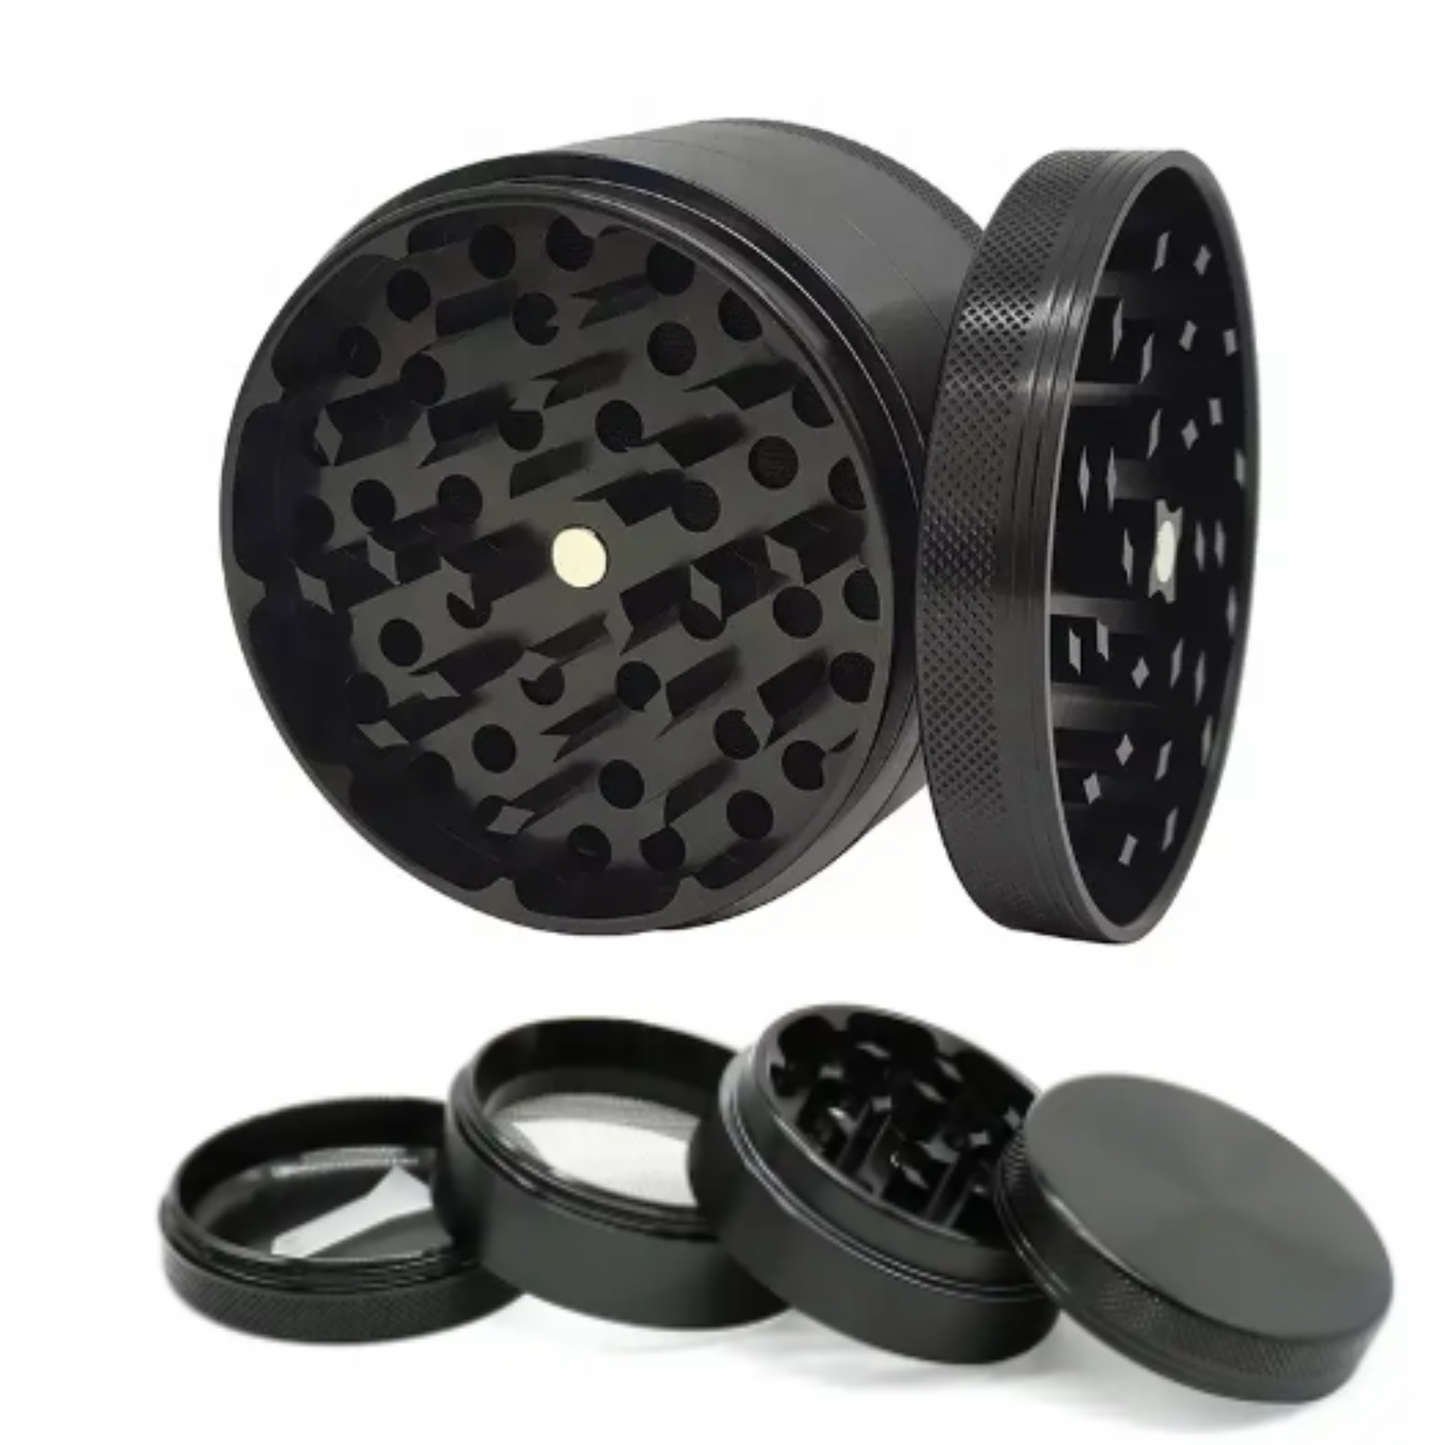 The Perfect Grinder